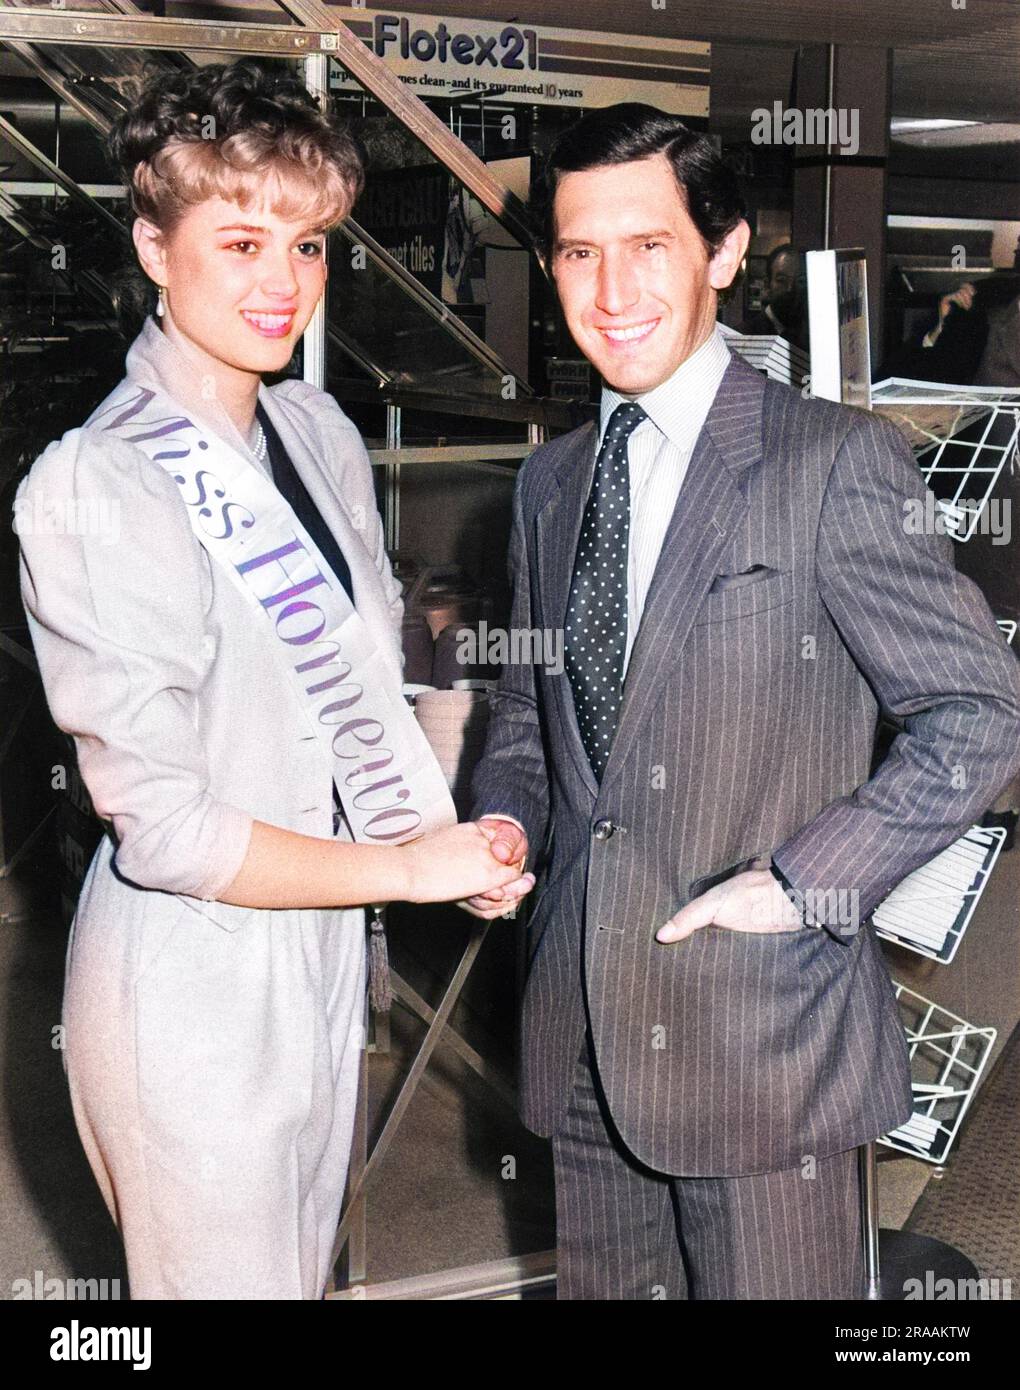 Peter Hugo (Prince Charles lookalike) with a beauty queen (Miss ...